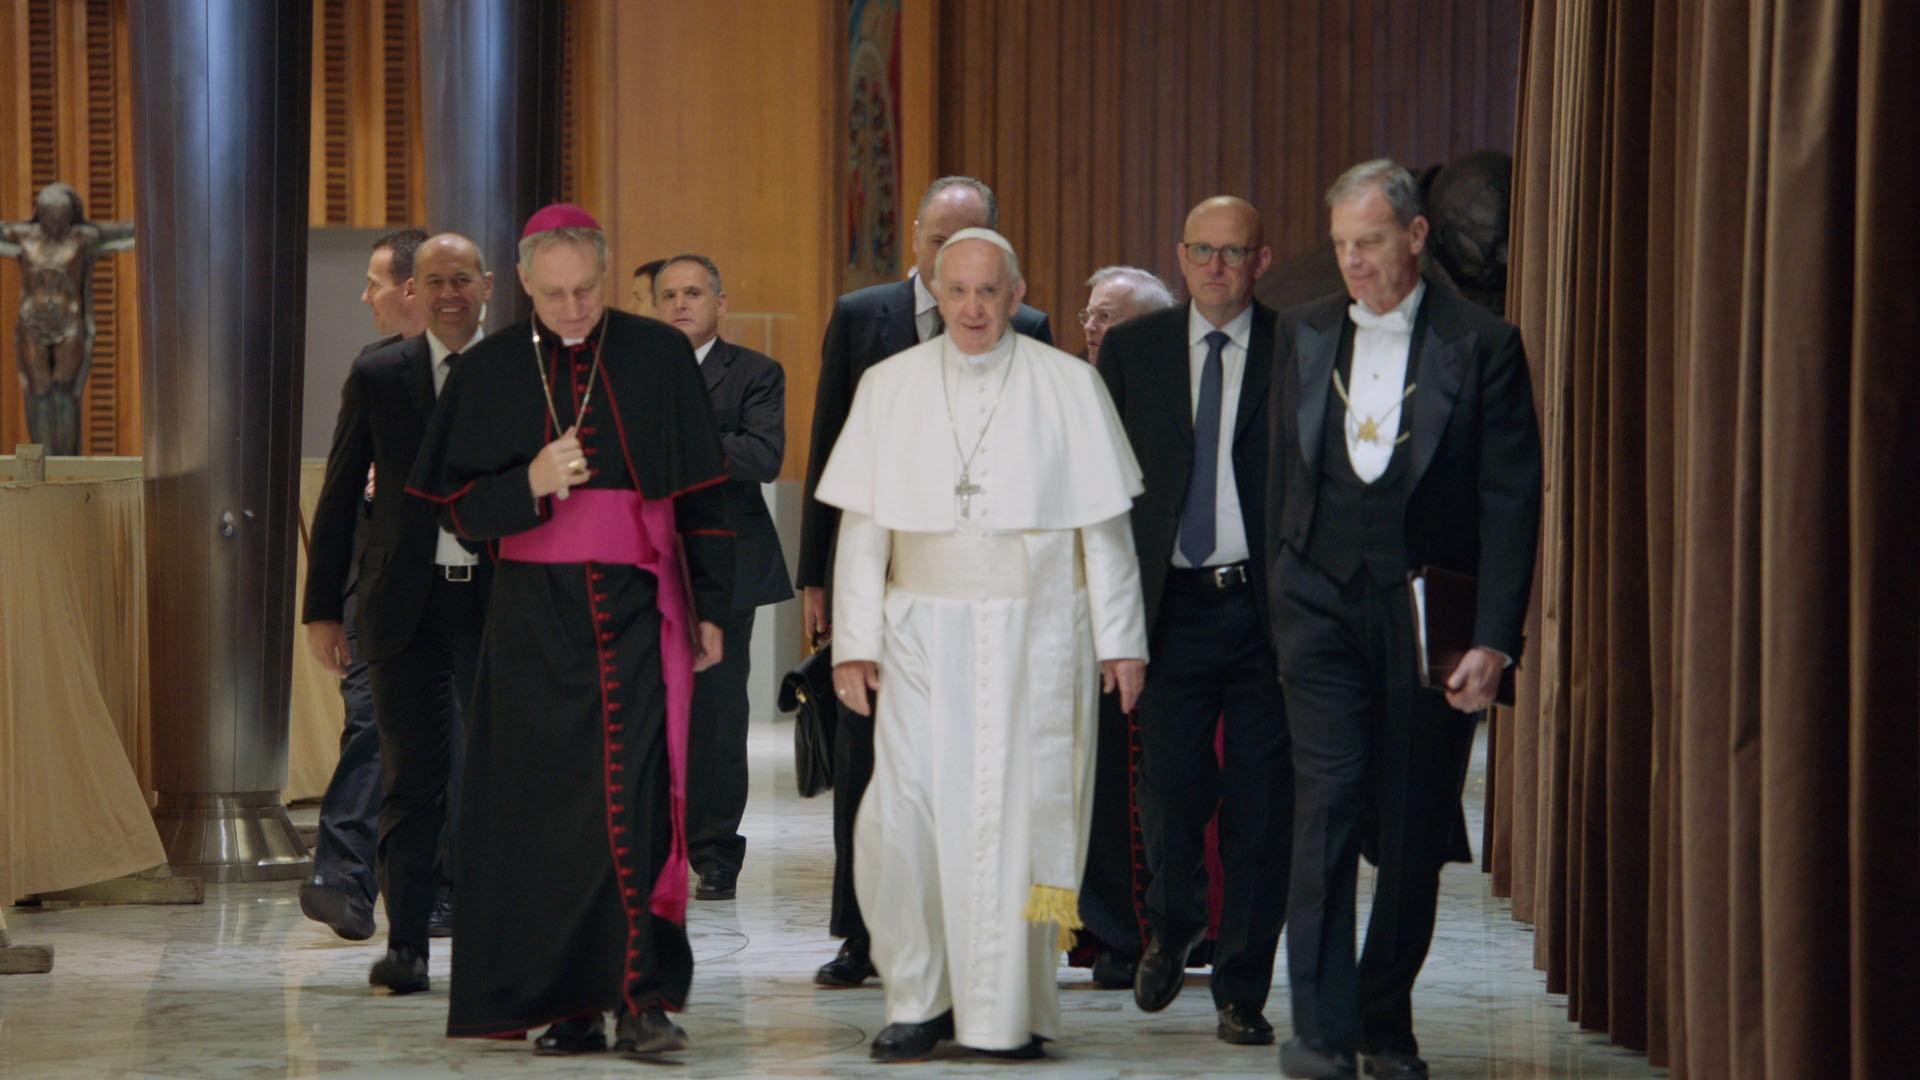 Holy Father Pope Francis walking with Vatican delegation inside the Vatican.